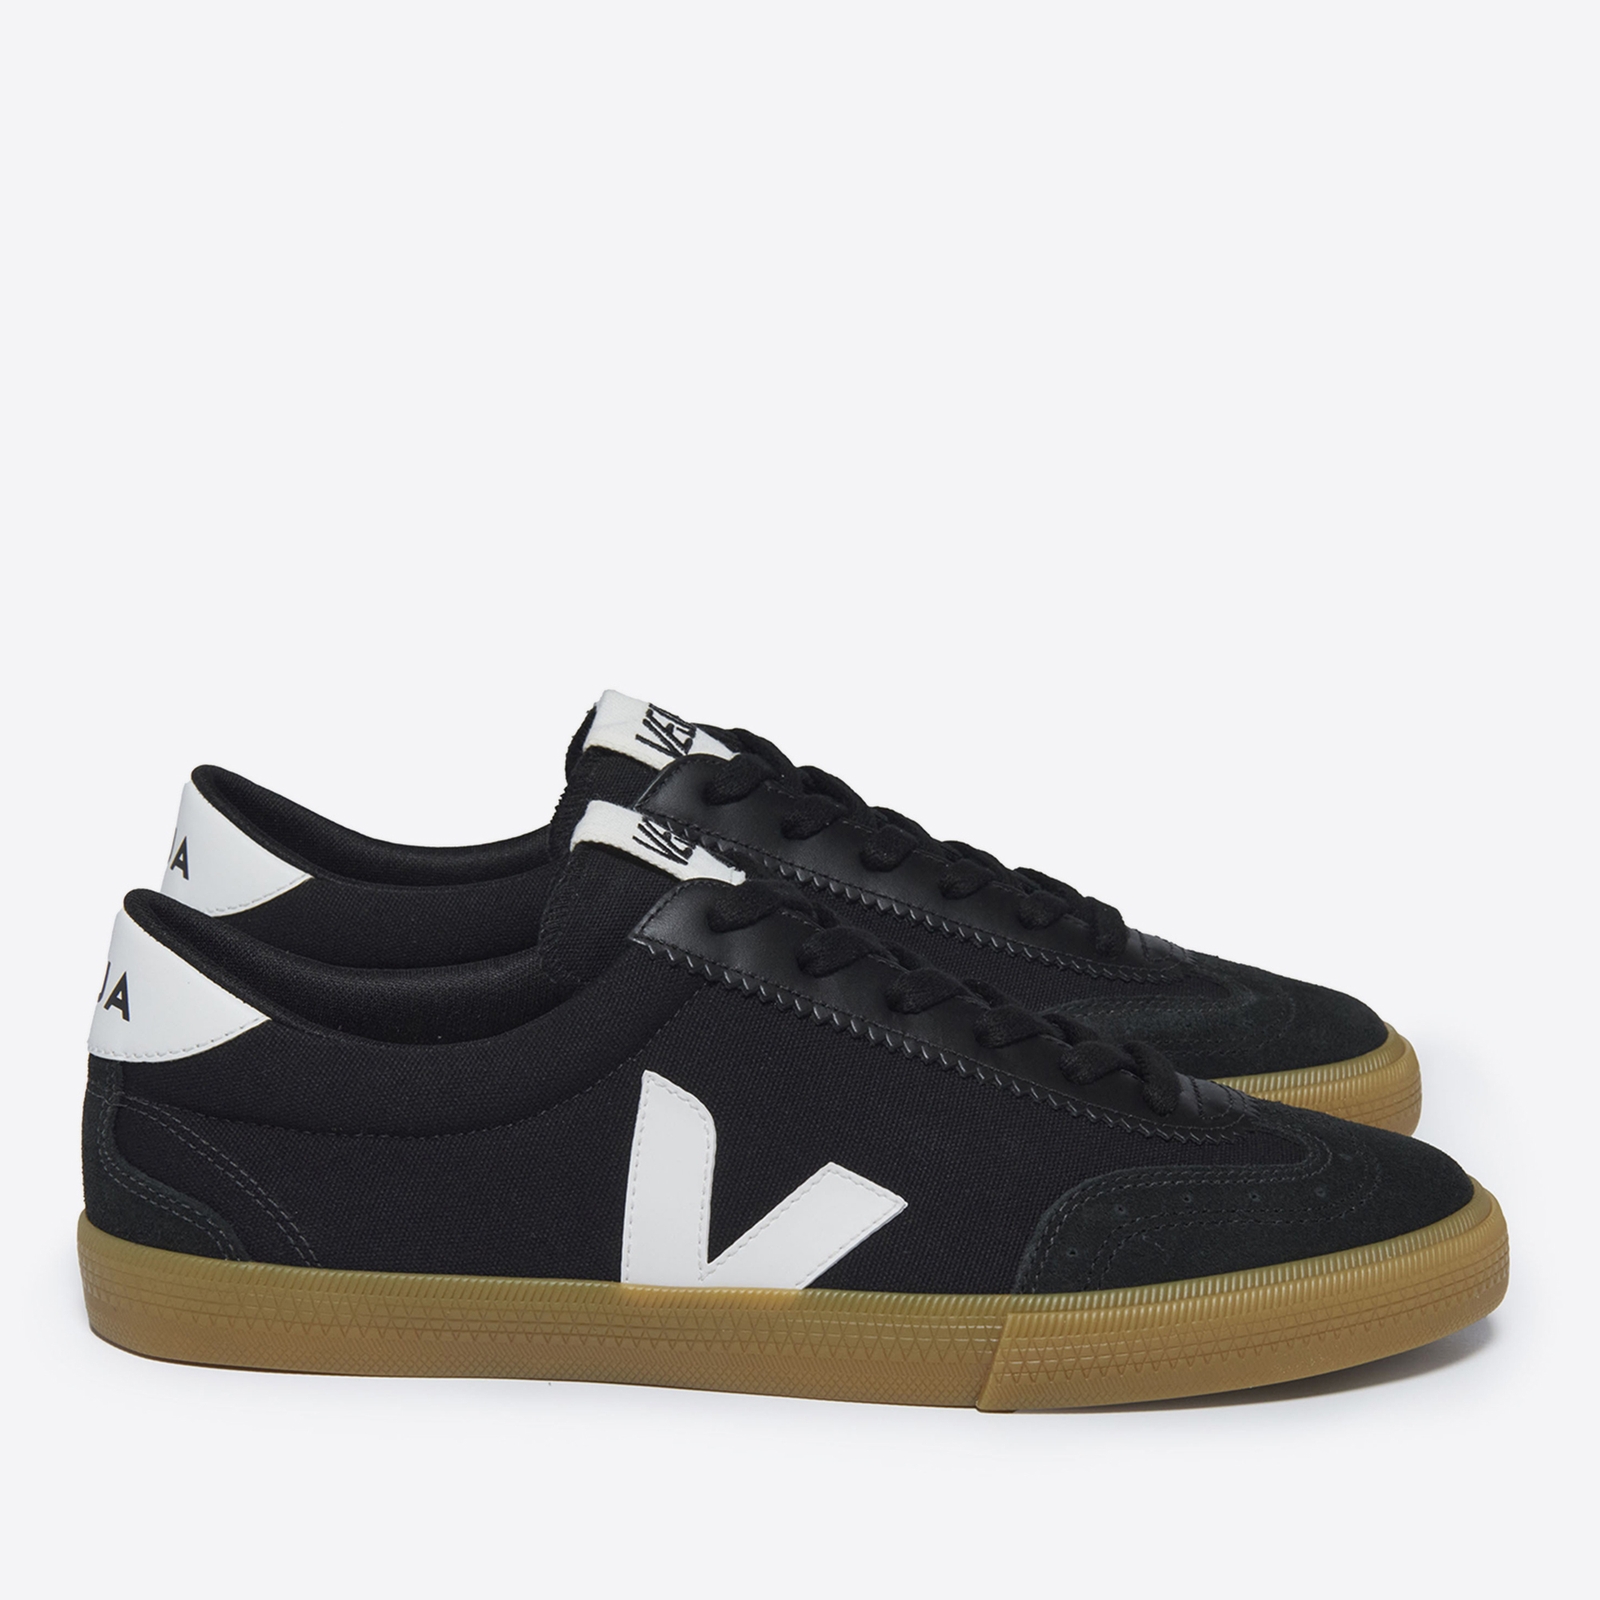 Veja Men's Volley Low Top Trainers - Black/White/Natural